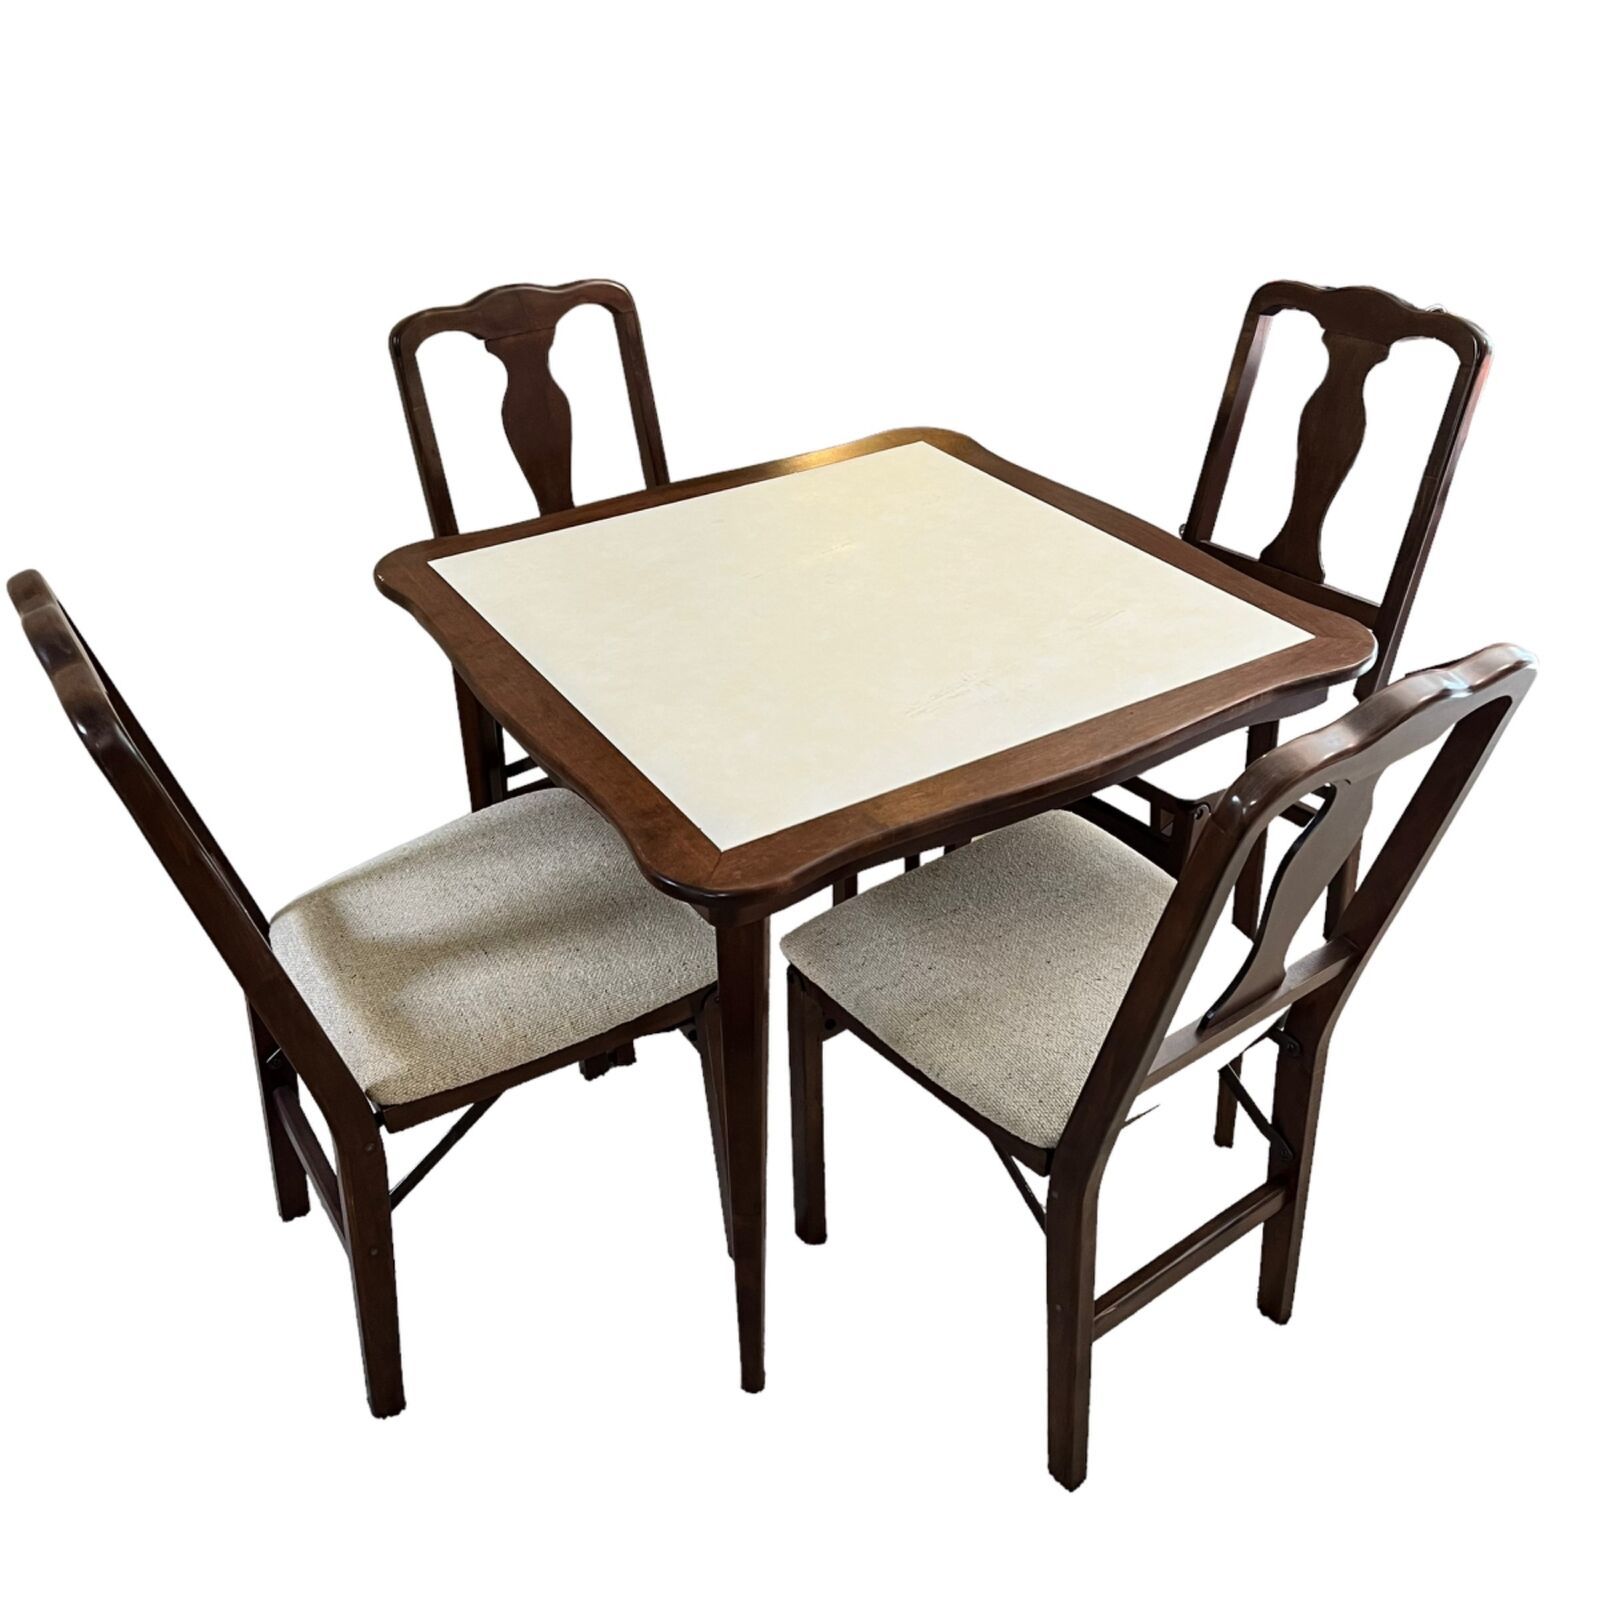 Fruitwood Padded Folding Dining Table & 4 Chairs Set - $288.00